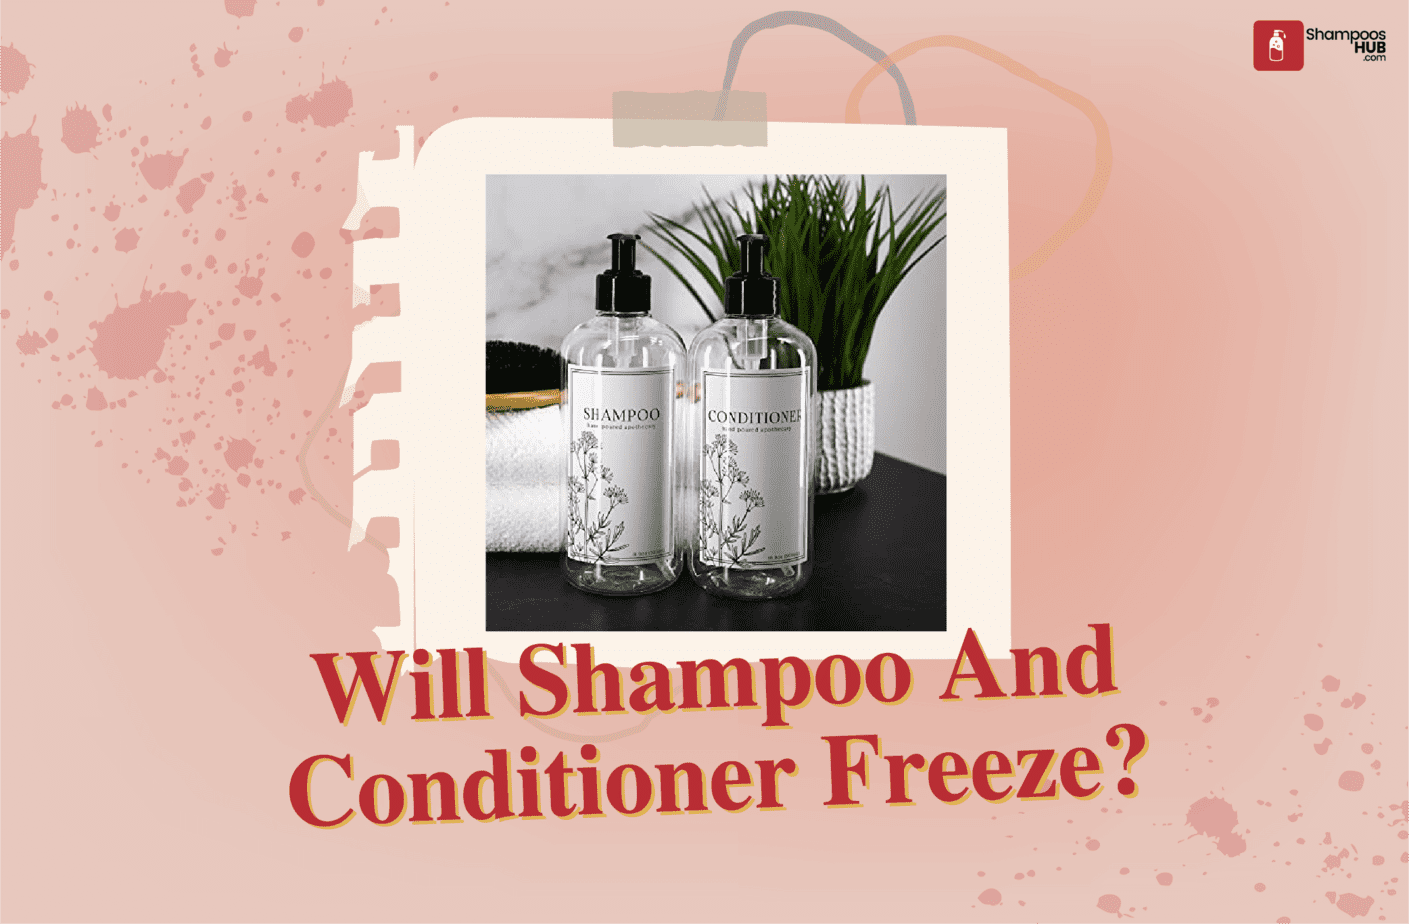 Will Shampoo And Conditioner Freeze?